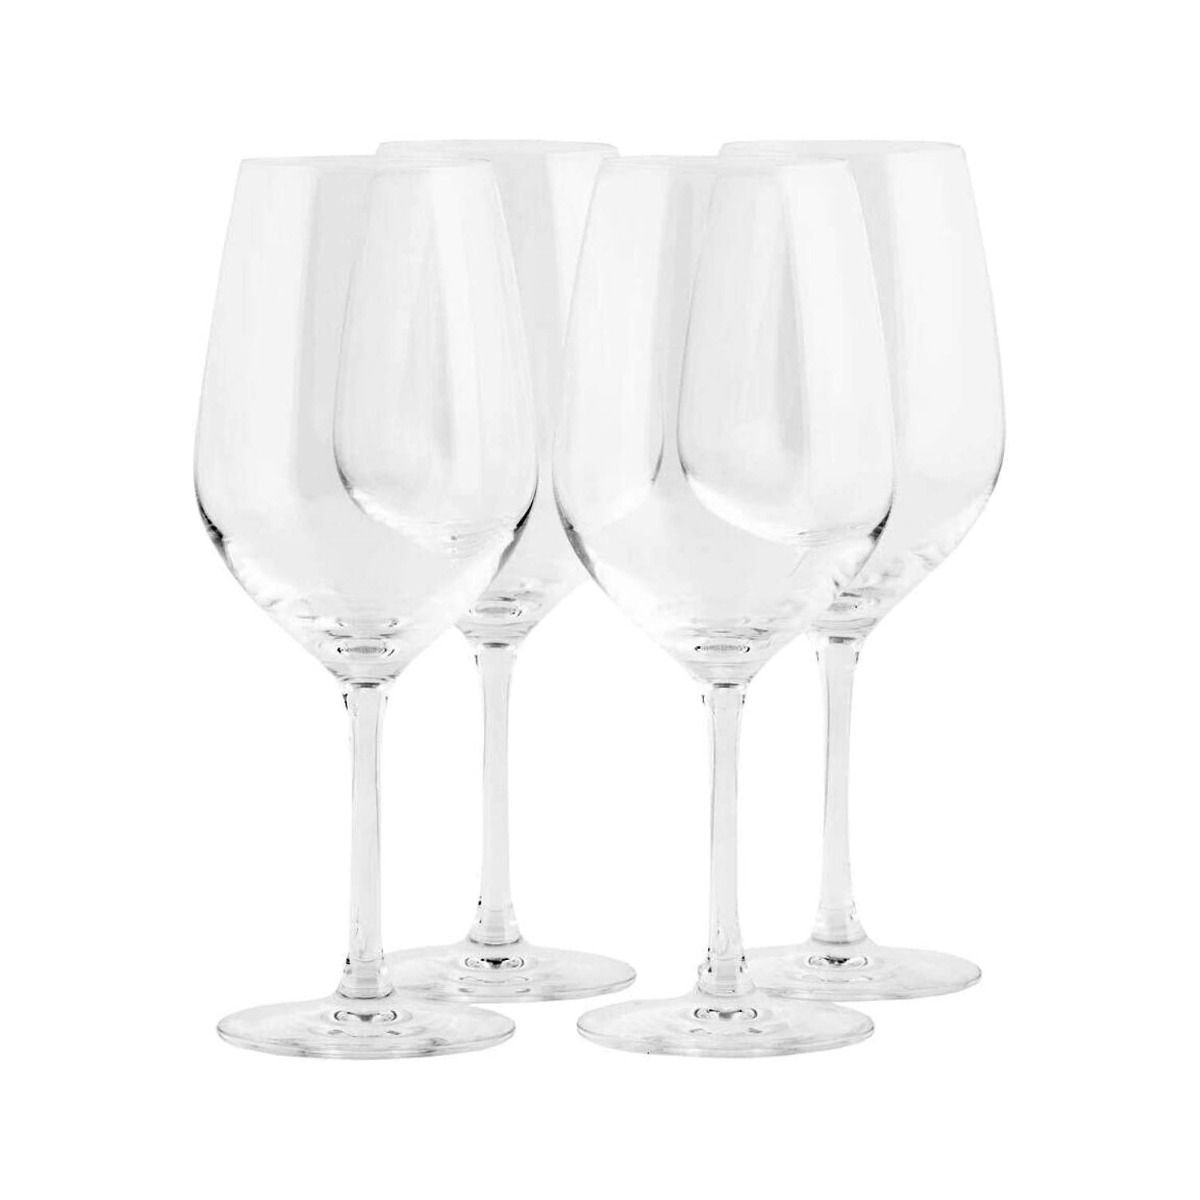 15.25oz Experience Red Wine Glasses (Set of 4), Stolzle